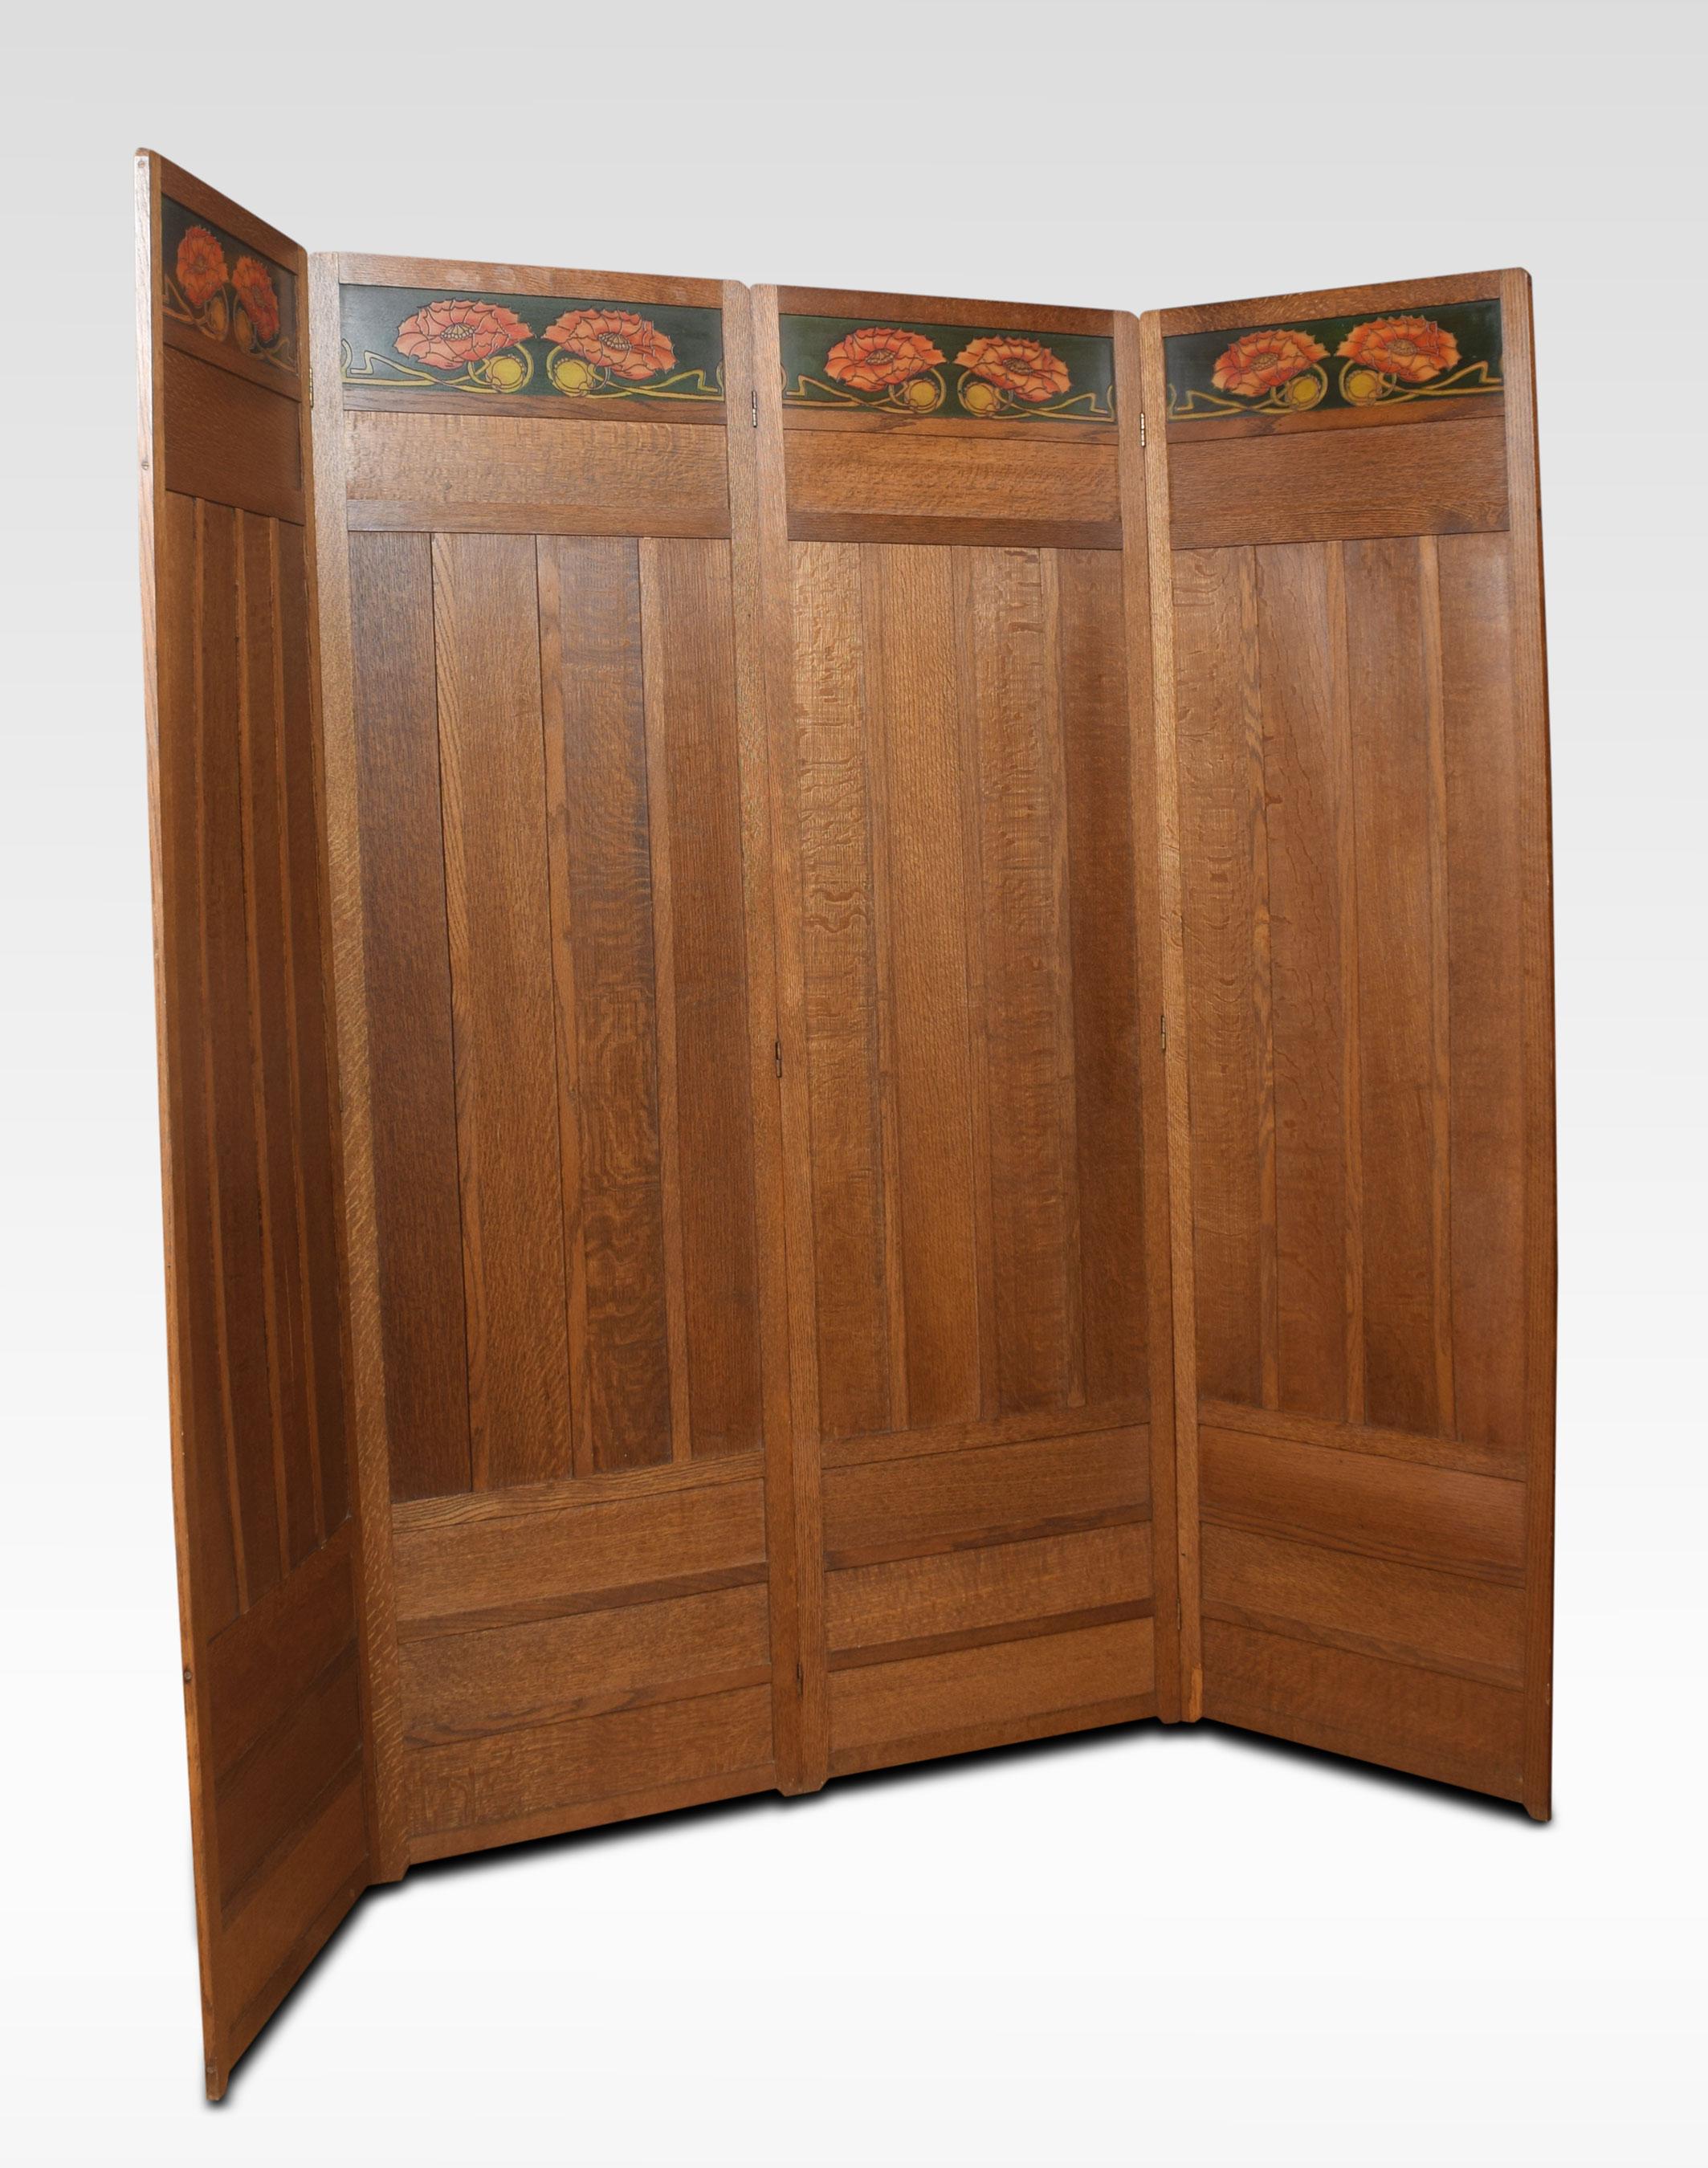 Liberty & Co Arts & Crafts dressing screen with floral painted panels in oak frame.
Dimensions:
Height 68 inches
Width 80 inches
Depth 1 inches.